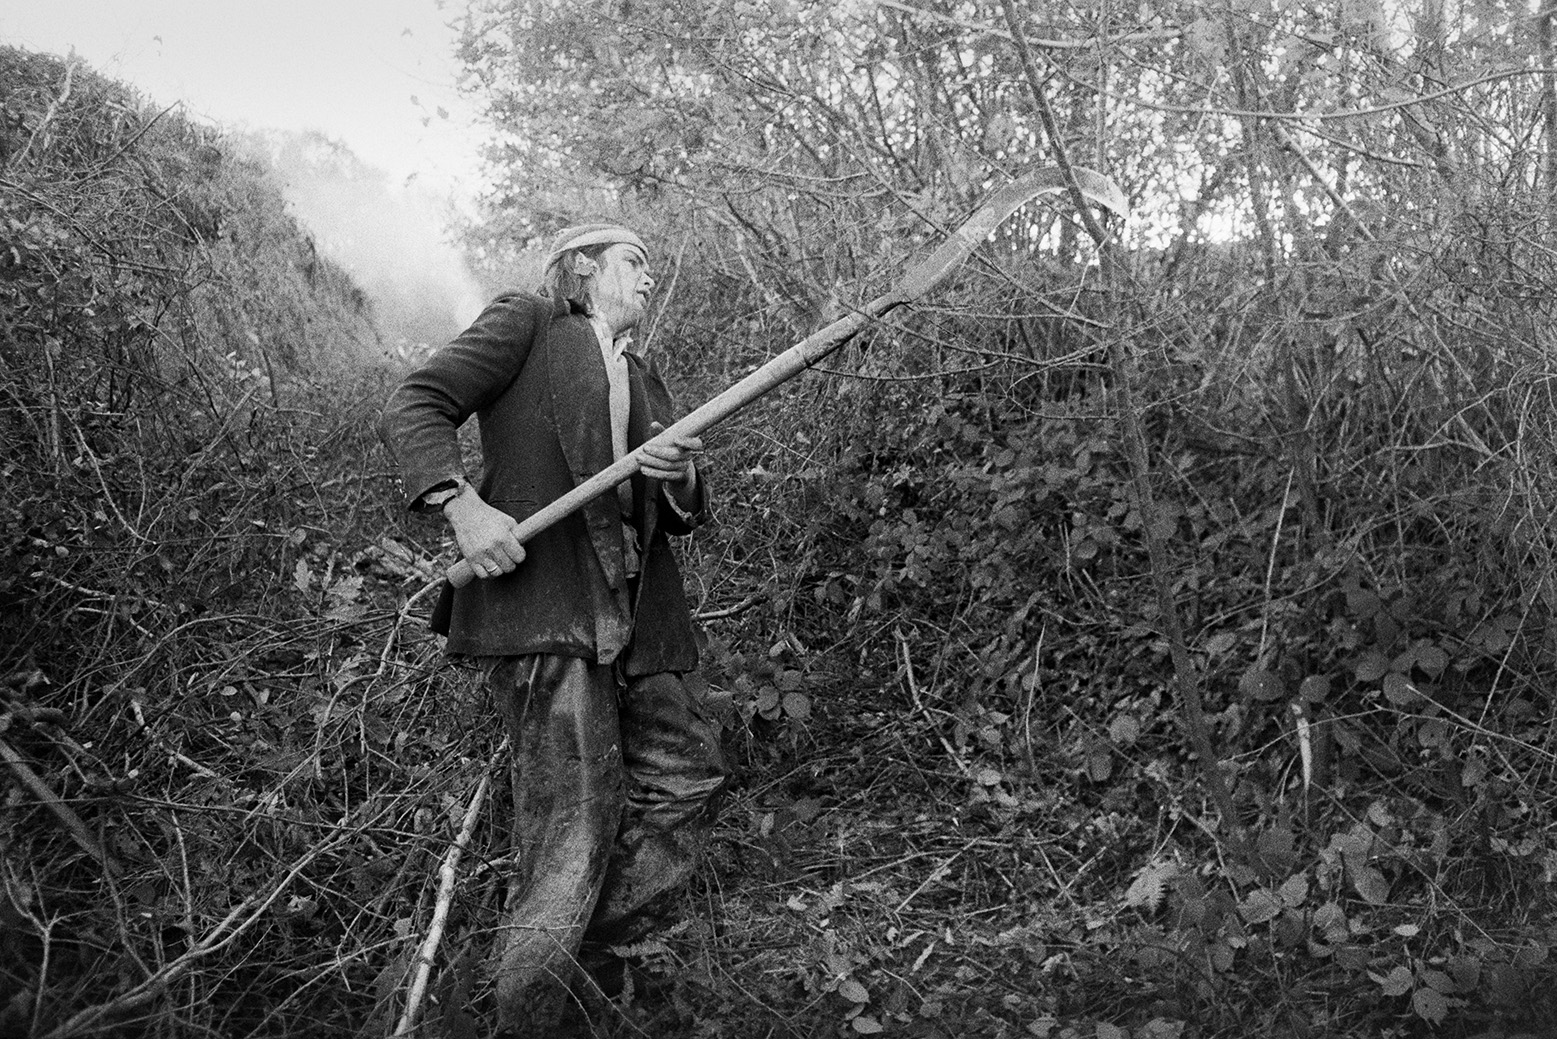 Derek Bright using a bill hook to trim hedges in Green Lane, Beaford. Smoke from the burnt cuttings can be seen in the background.